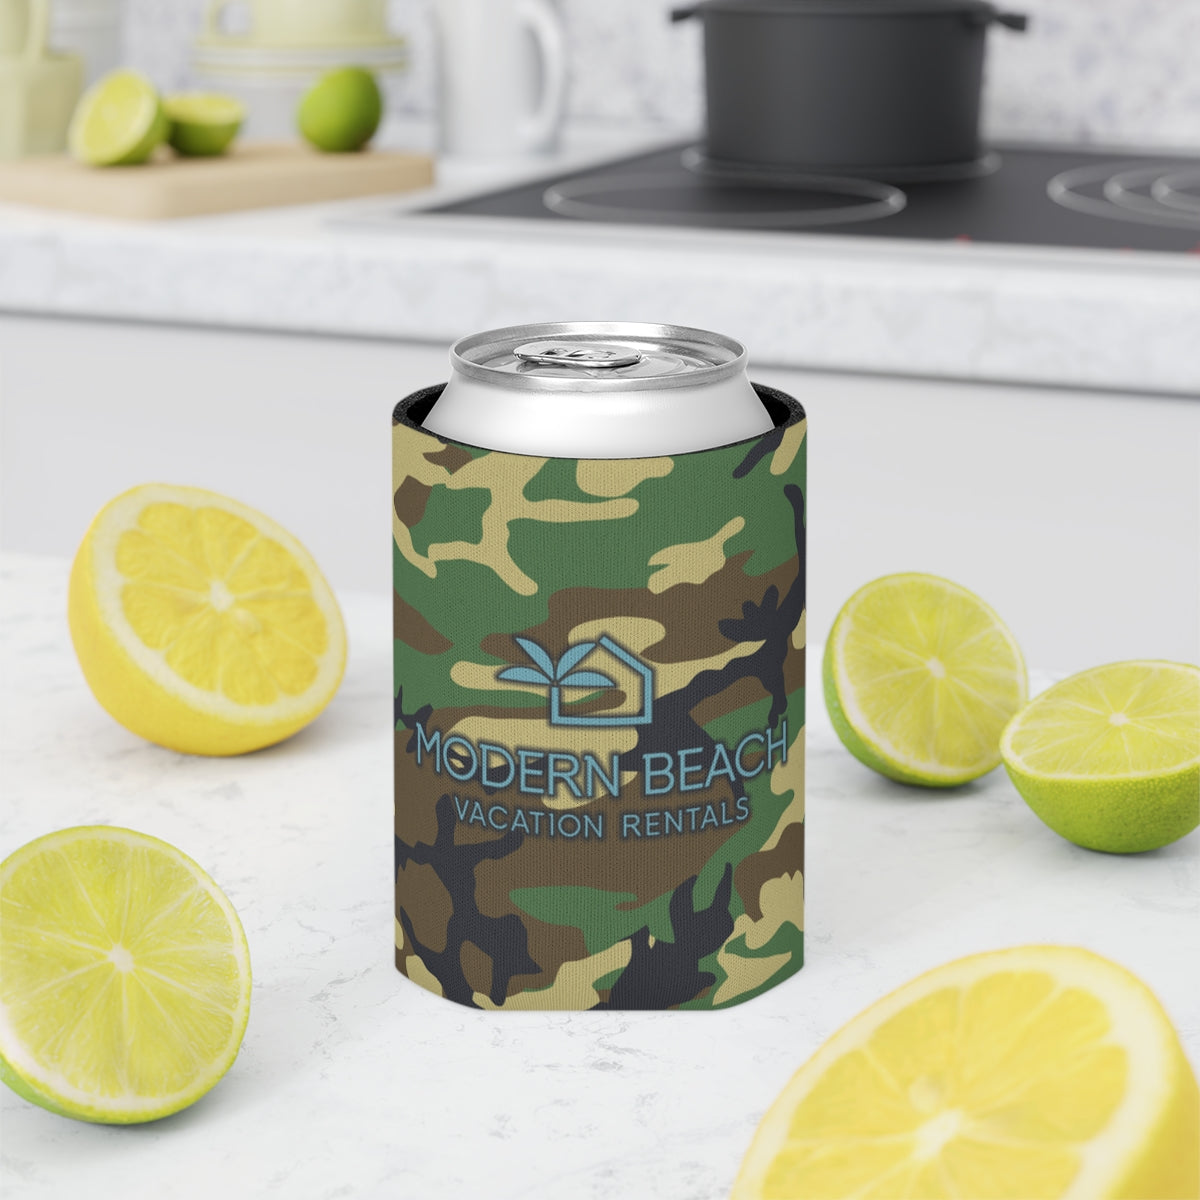 Modern Beach Vacation Rentals Basic Logo Camouflage BDU Can Coozie Cooler